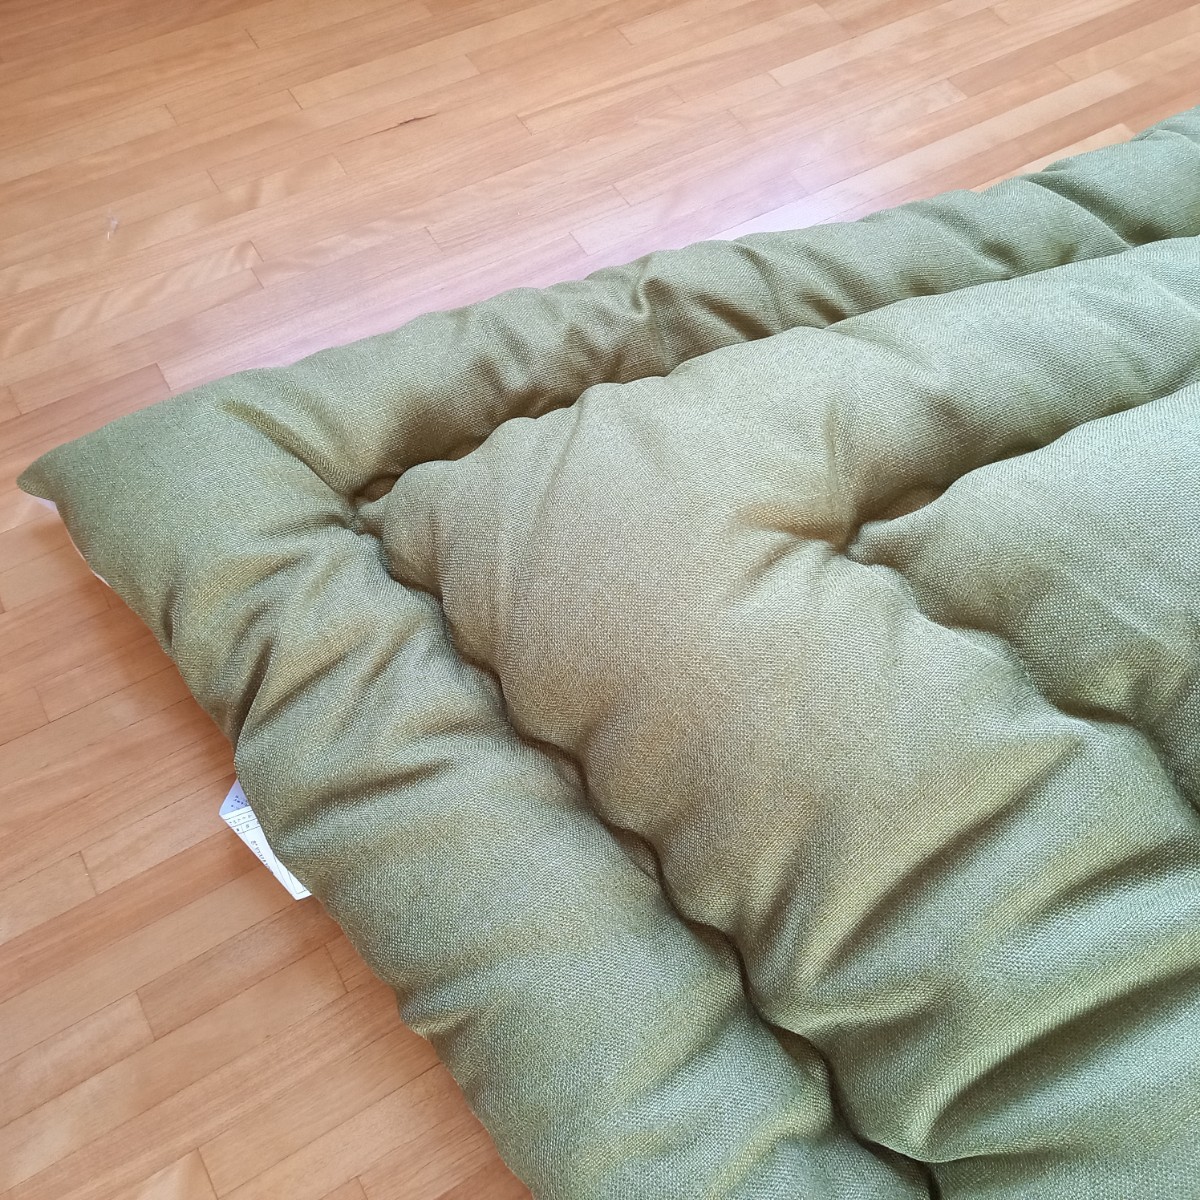  super water repelling processing kotatsu futon large size rectangle thick cloth use kotatsu quilt clean safety made in Japan ( feather futon . futon futon mattress pillow ) etc. exhibiting.. green 